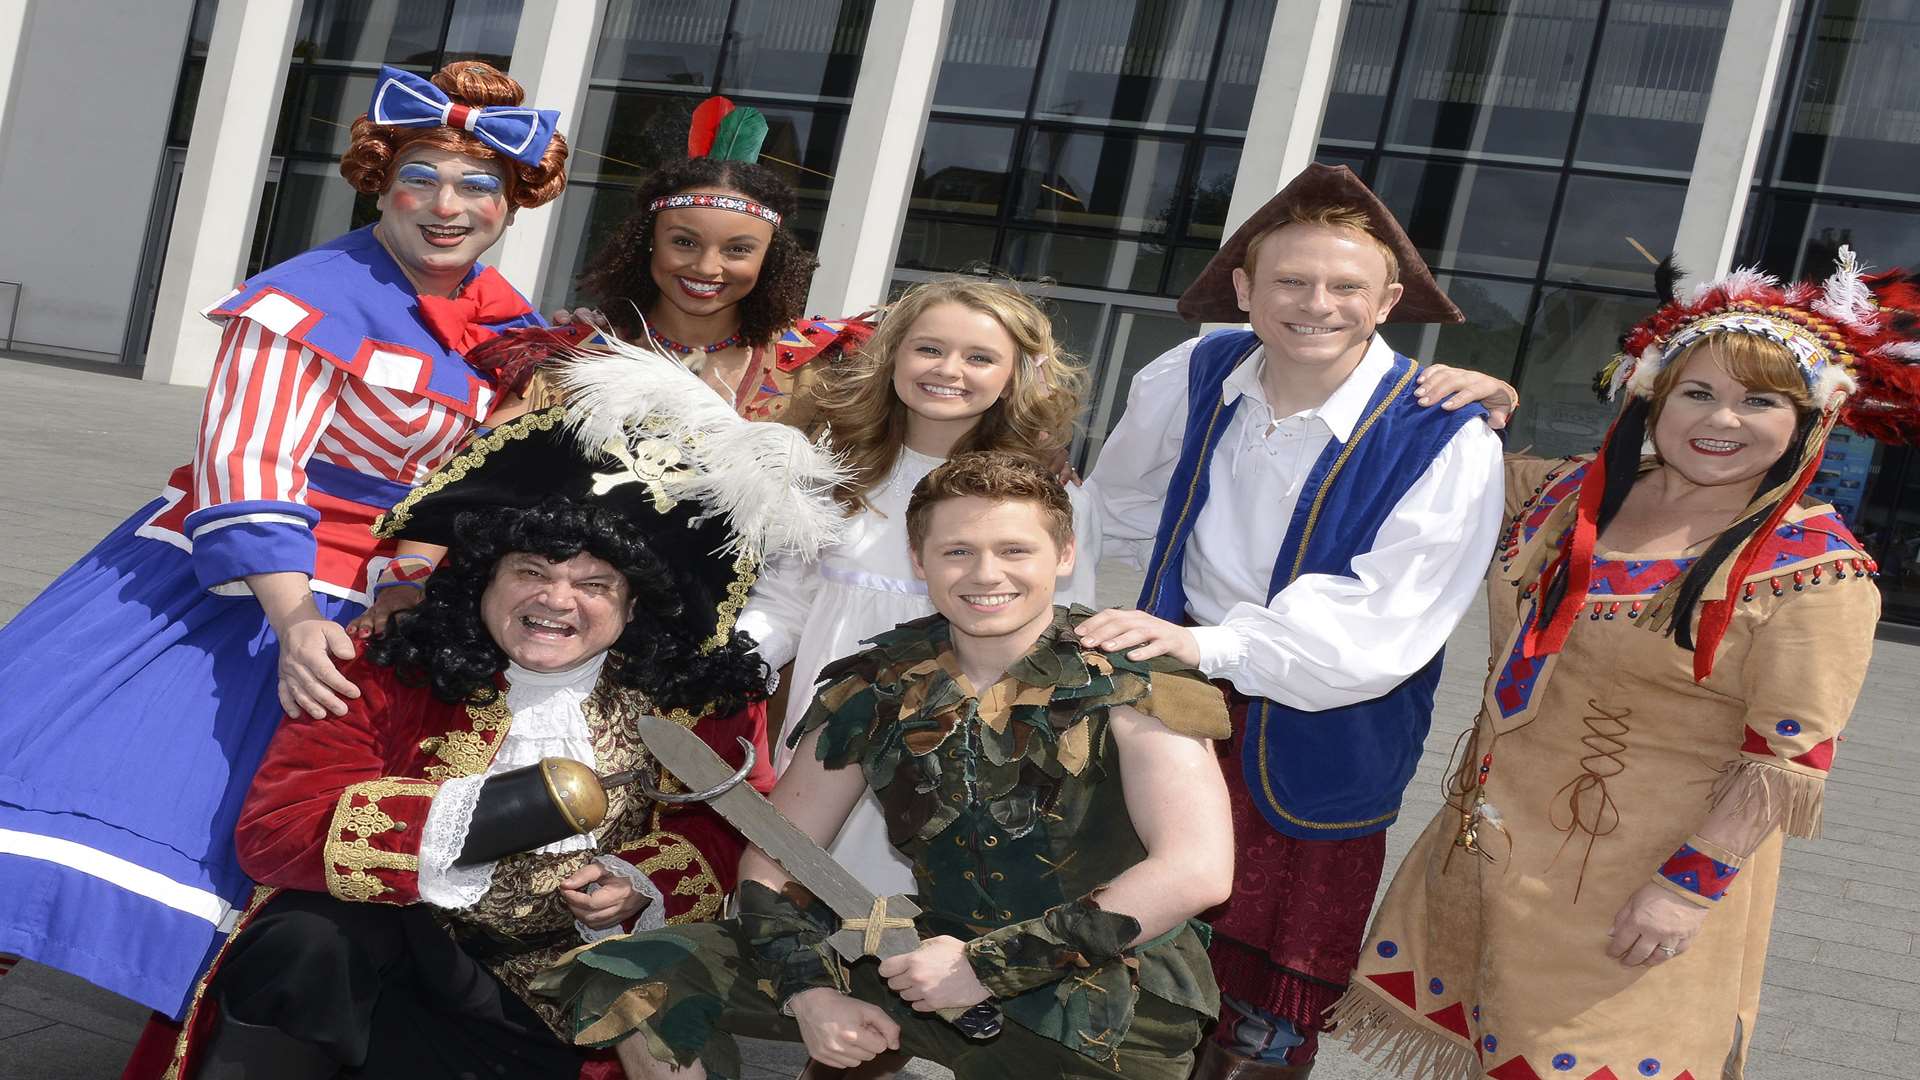 Cast of this year's Marlowe pantomime Peter Pan will not be appearing at the Deal Christmas Light's switch-on